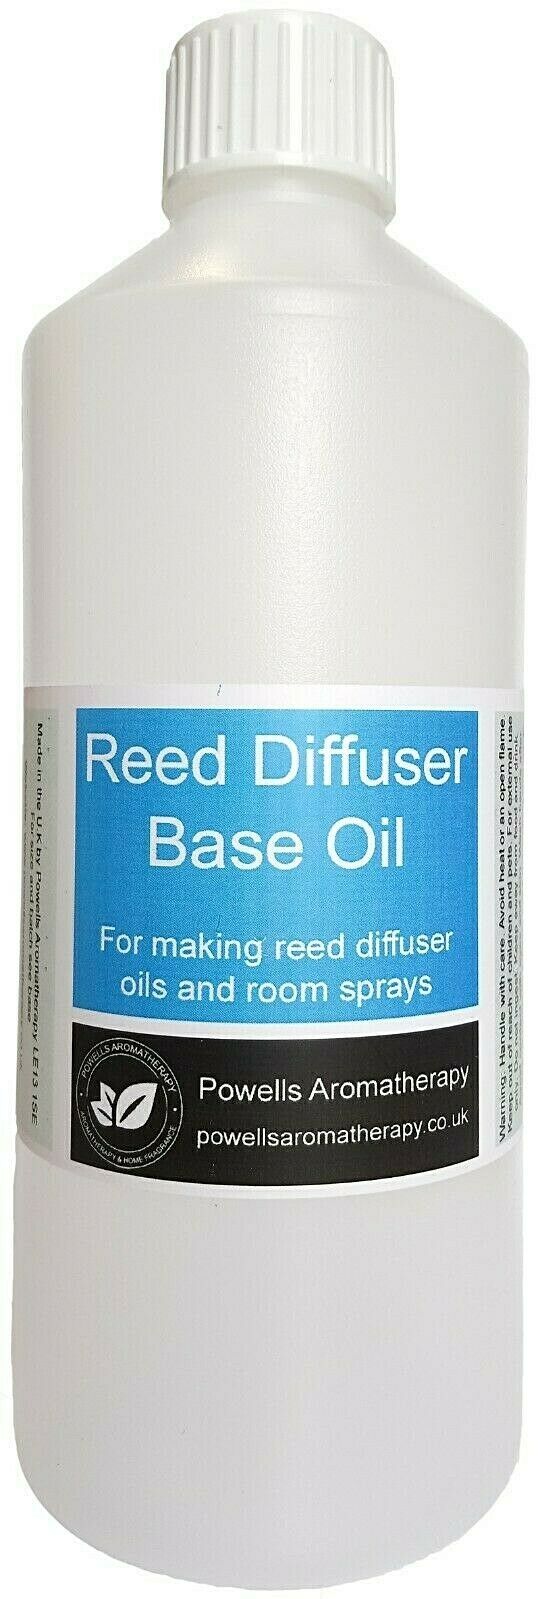 500ml - Reed Diffuser Base Oil - Reed Diffuser Carrier Oils